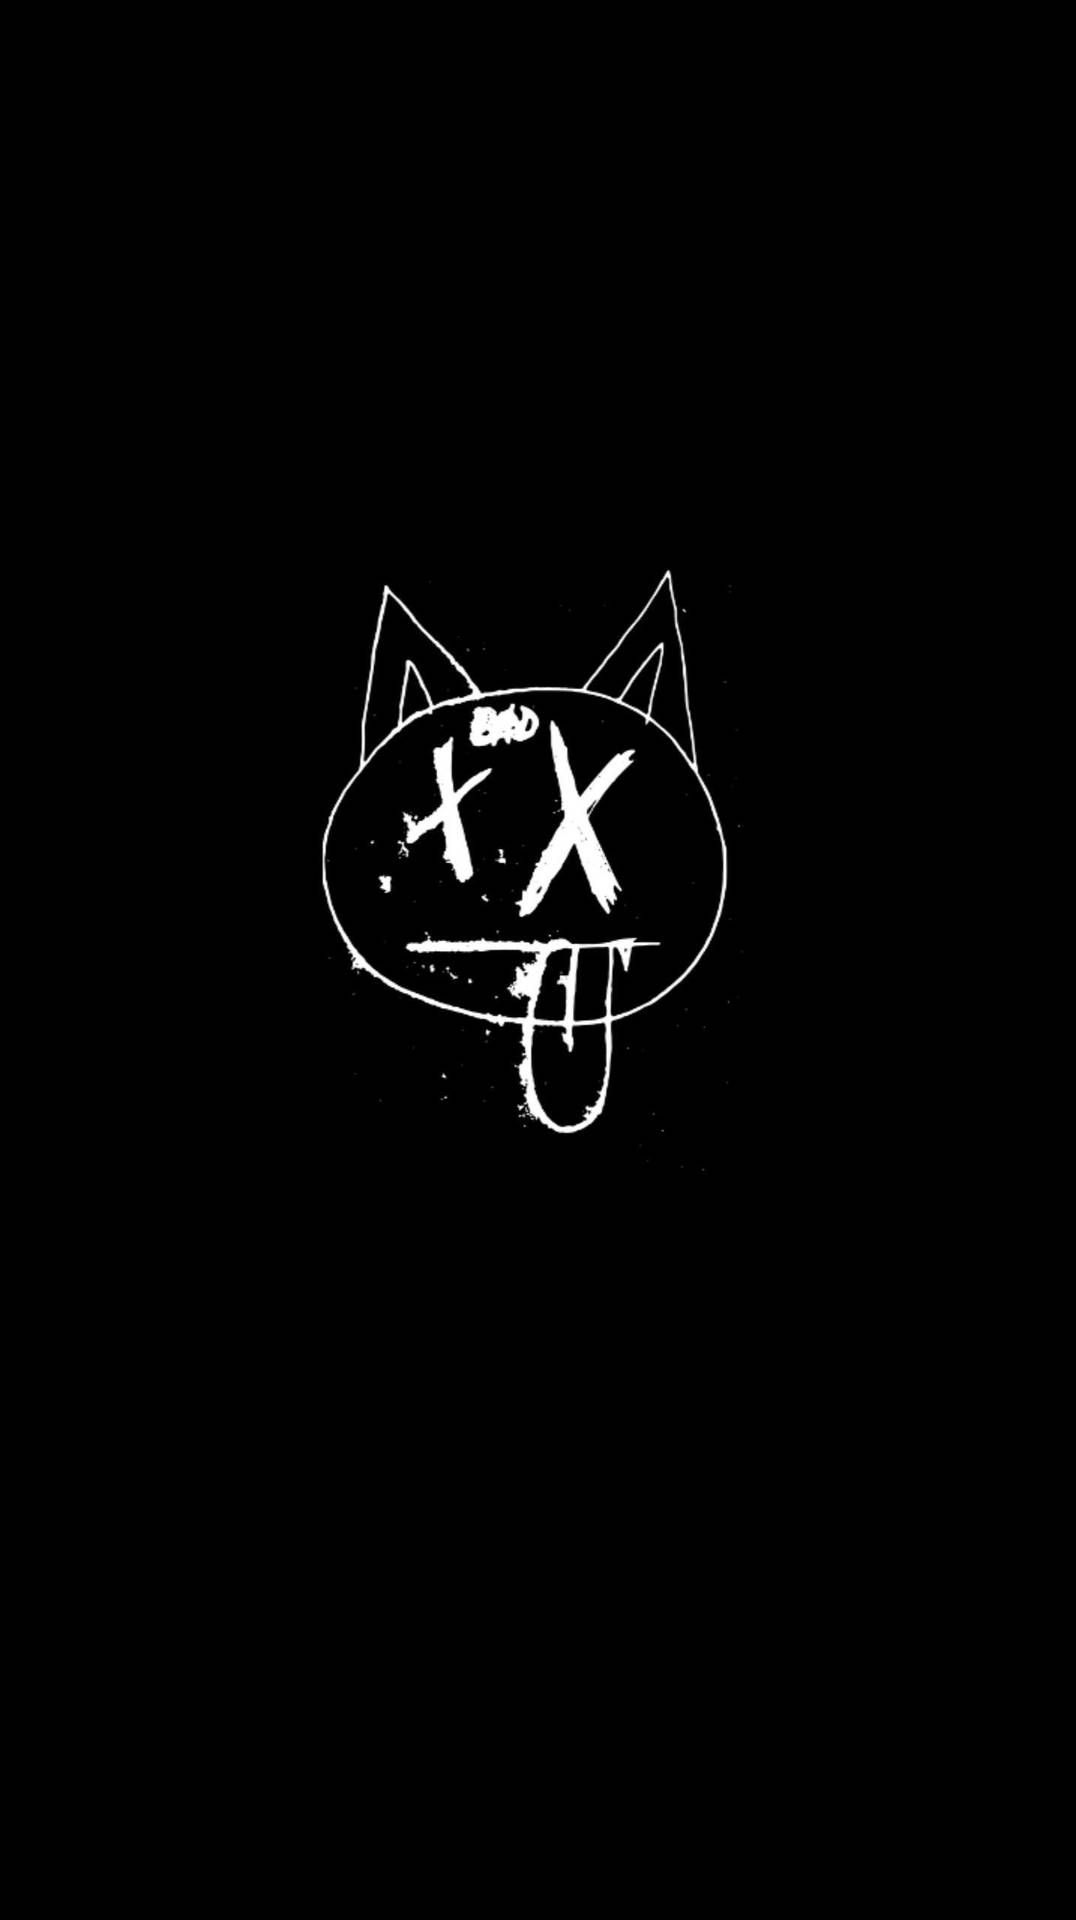 A black and white cat with an x on its face - Emo